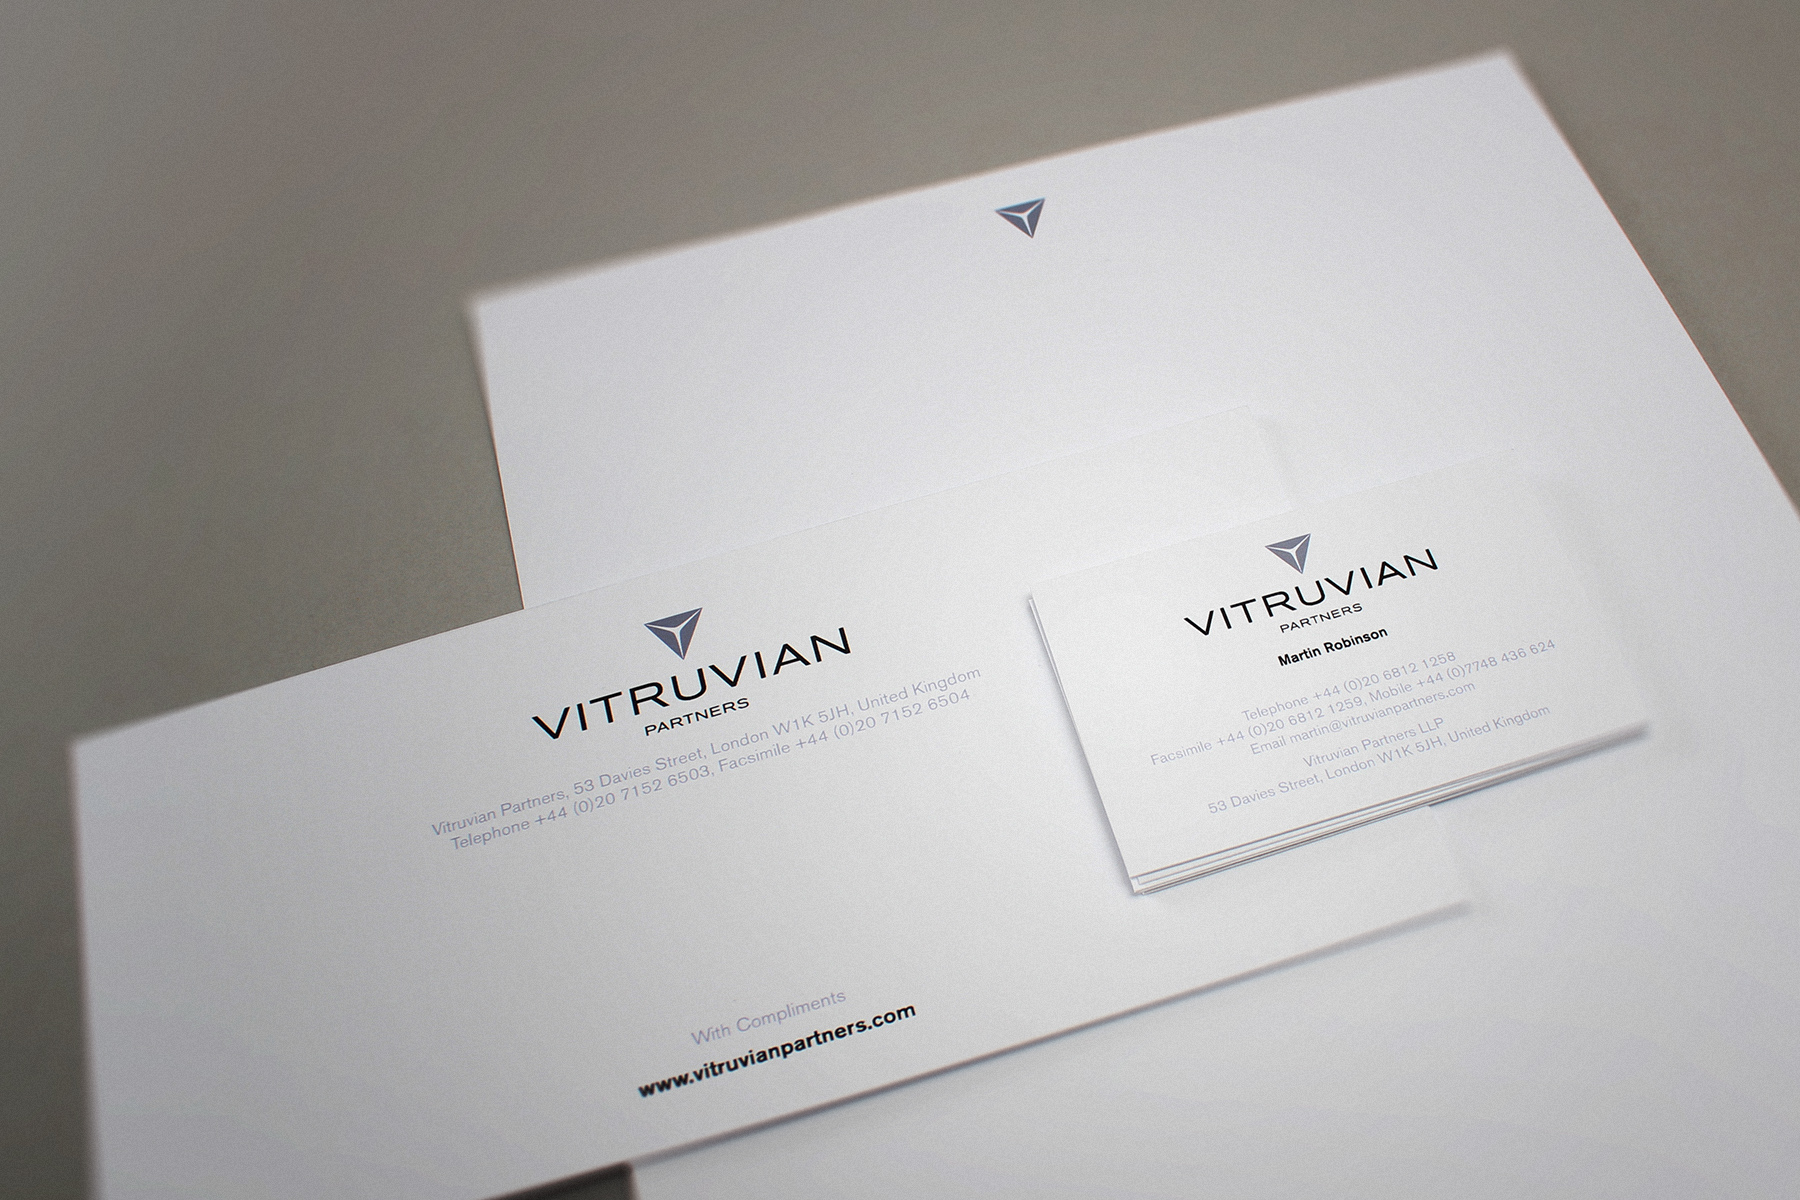 The business stationery relies on subtle effect rather than strong visuals.